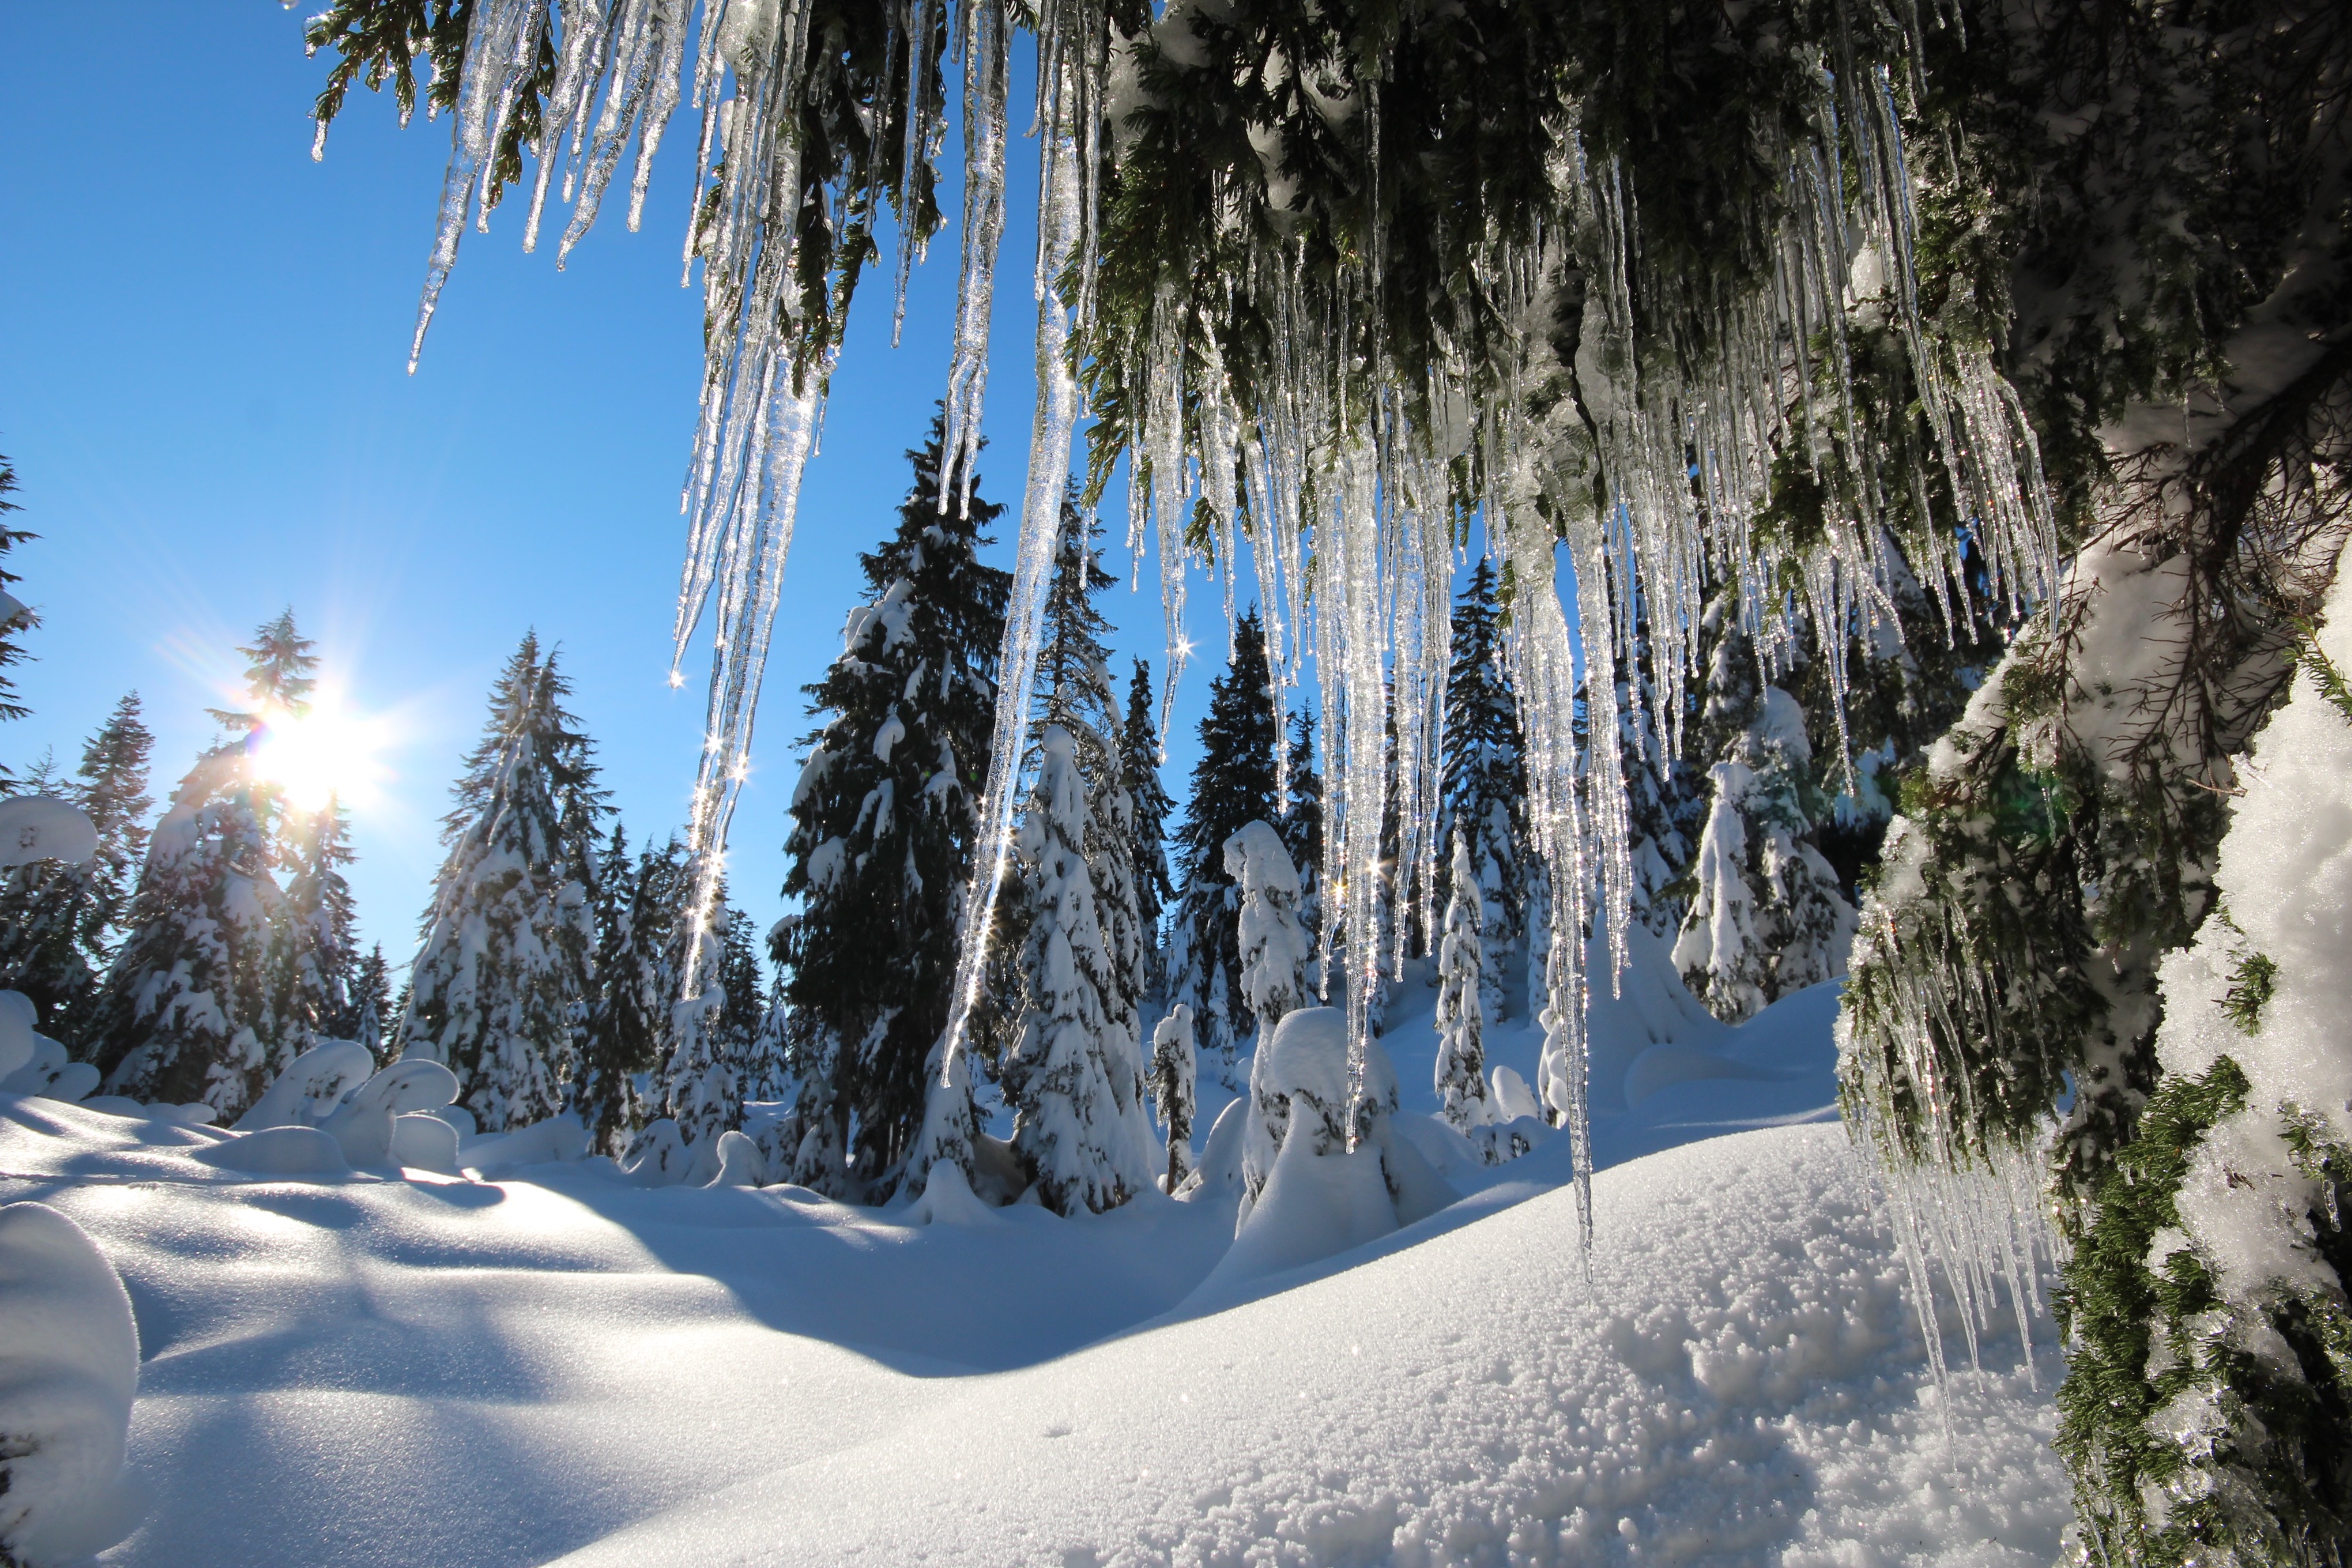 Icicles in paradise, Mt Seymour